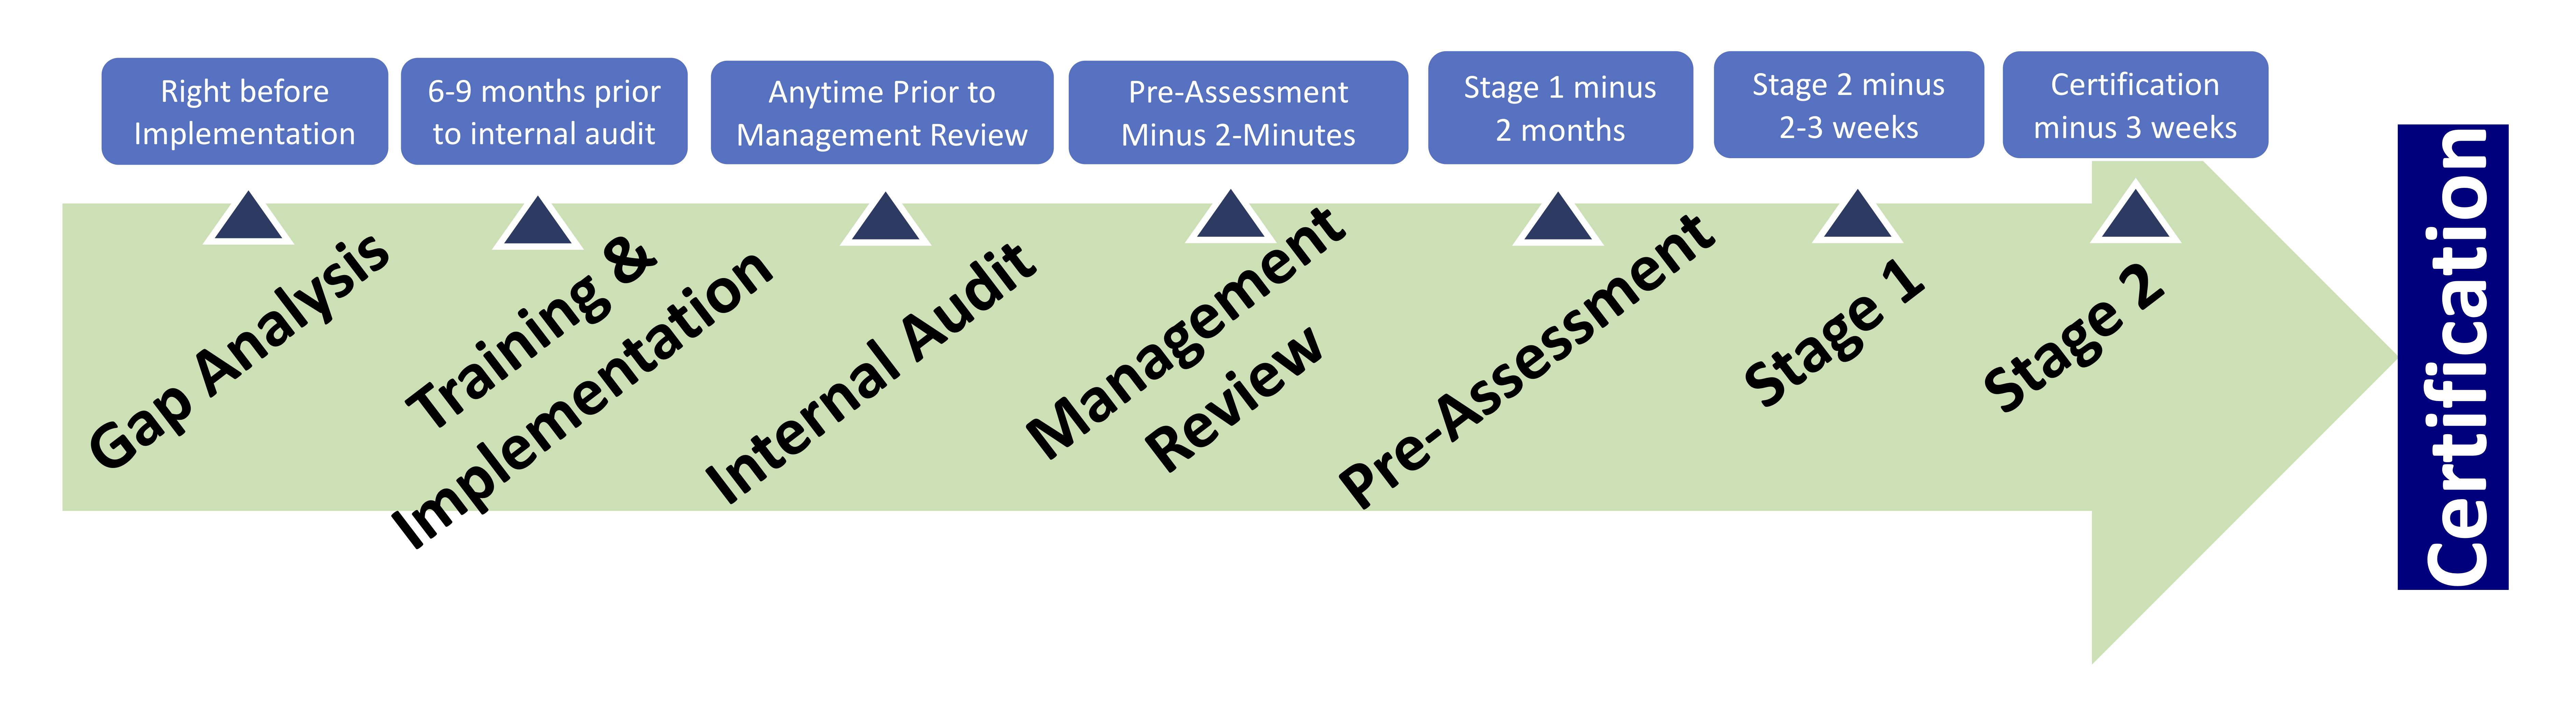 Iso 9001 2 Stage Registration Audit Details About Stage 1 And 2 Audits